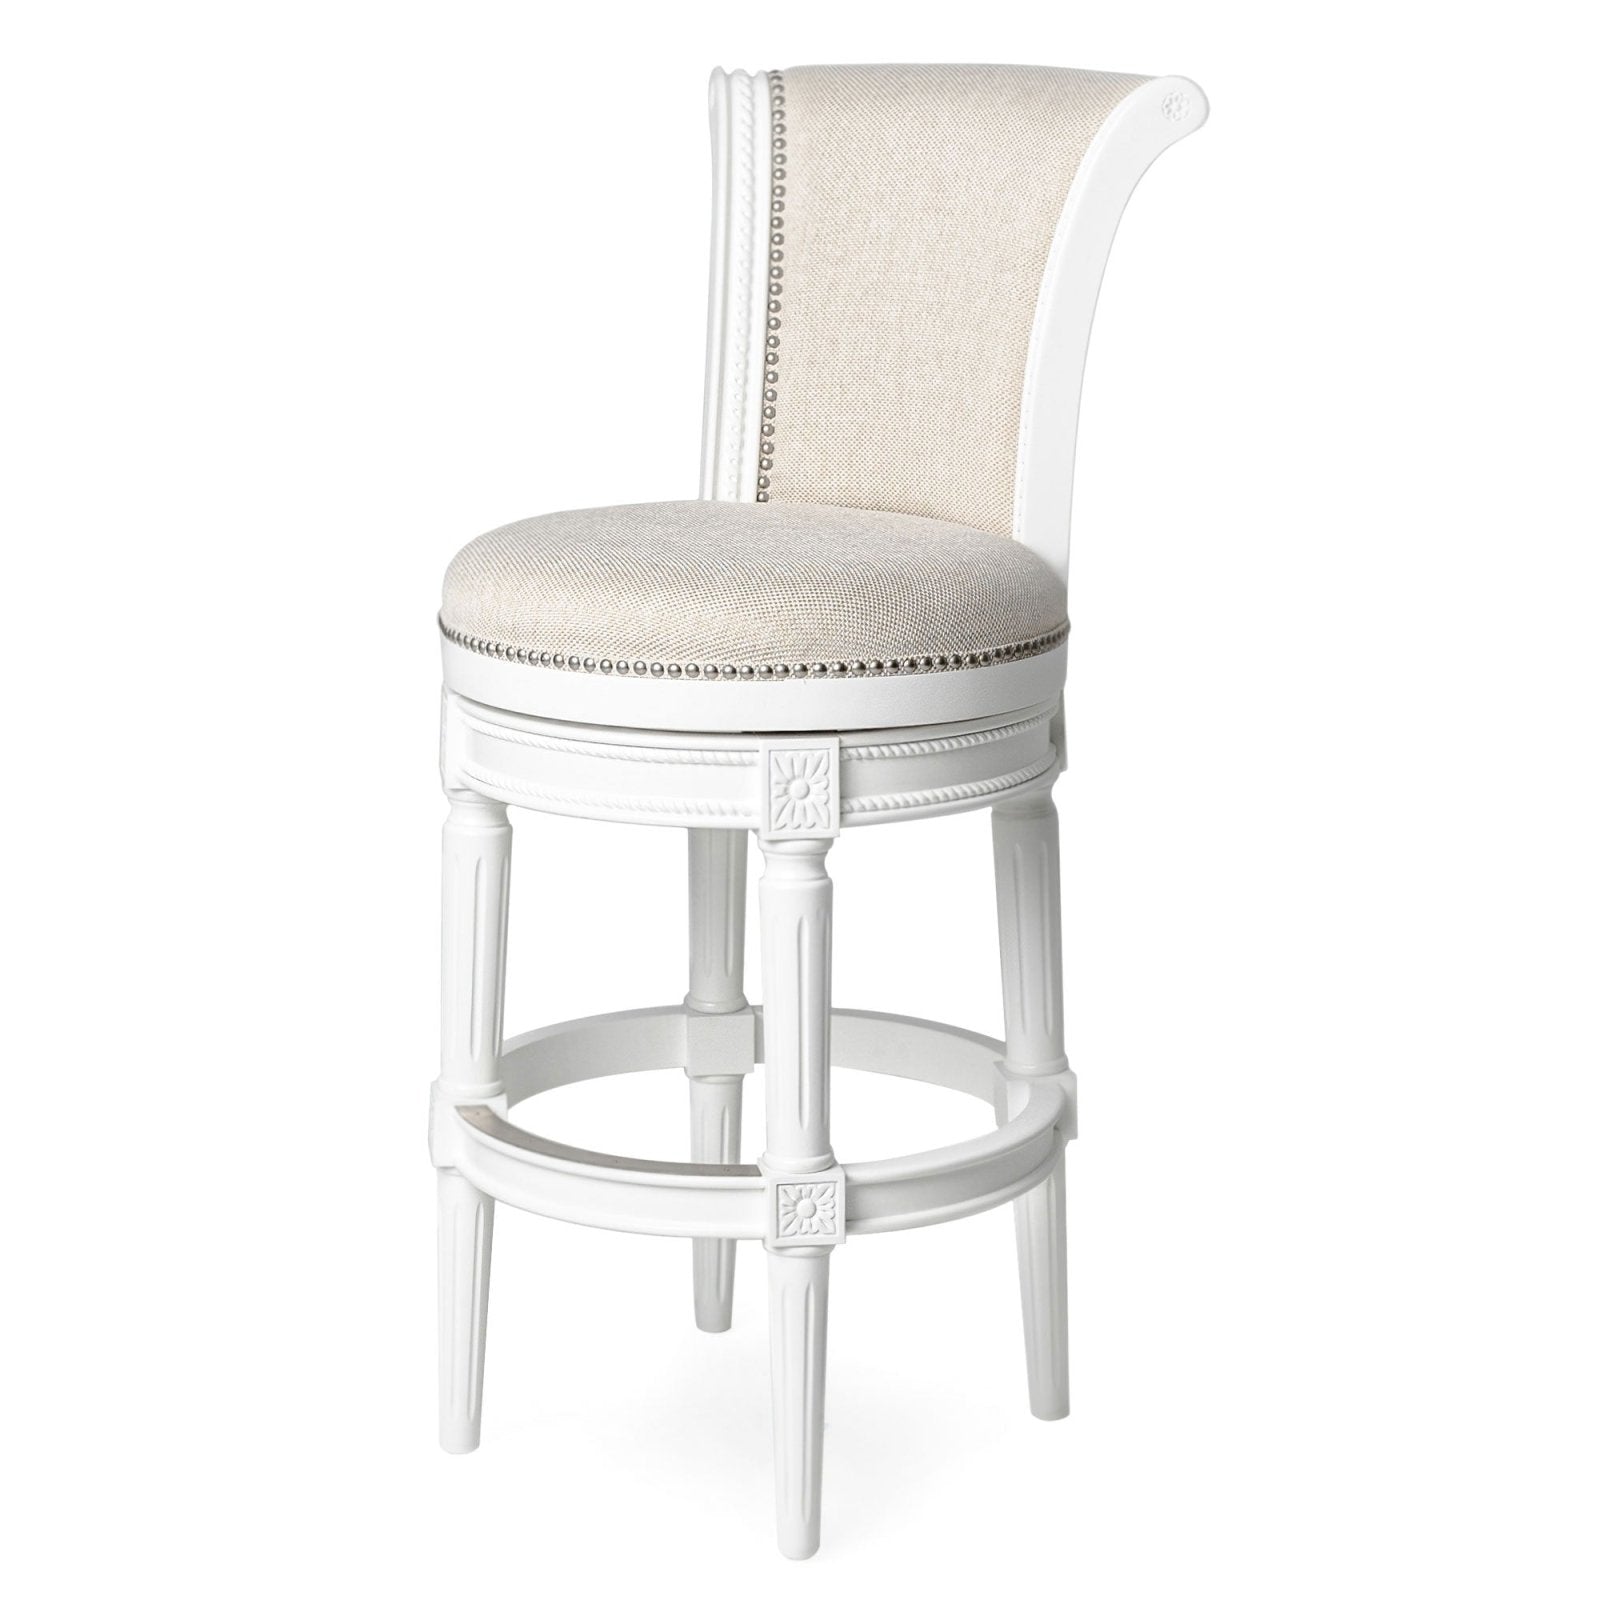 Pullman Bar Stool in Alabaster White Finish with Cream Fabric Upholstery in Stools by Maven Lane